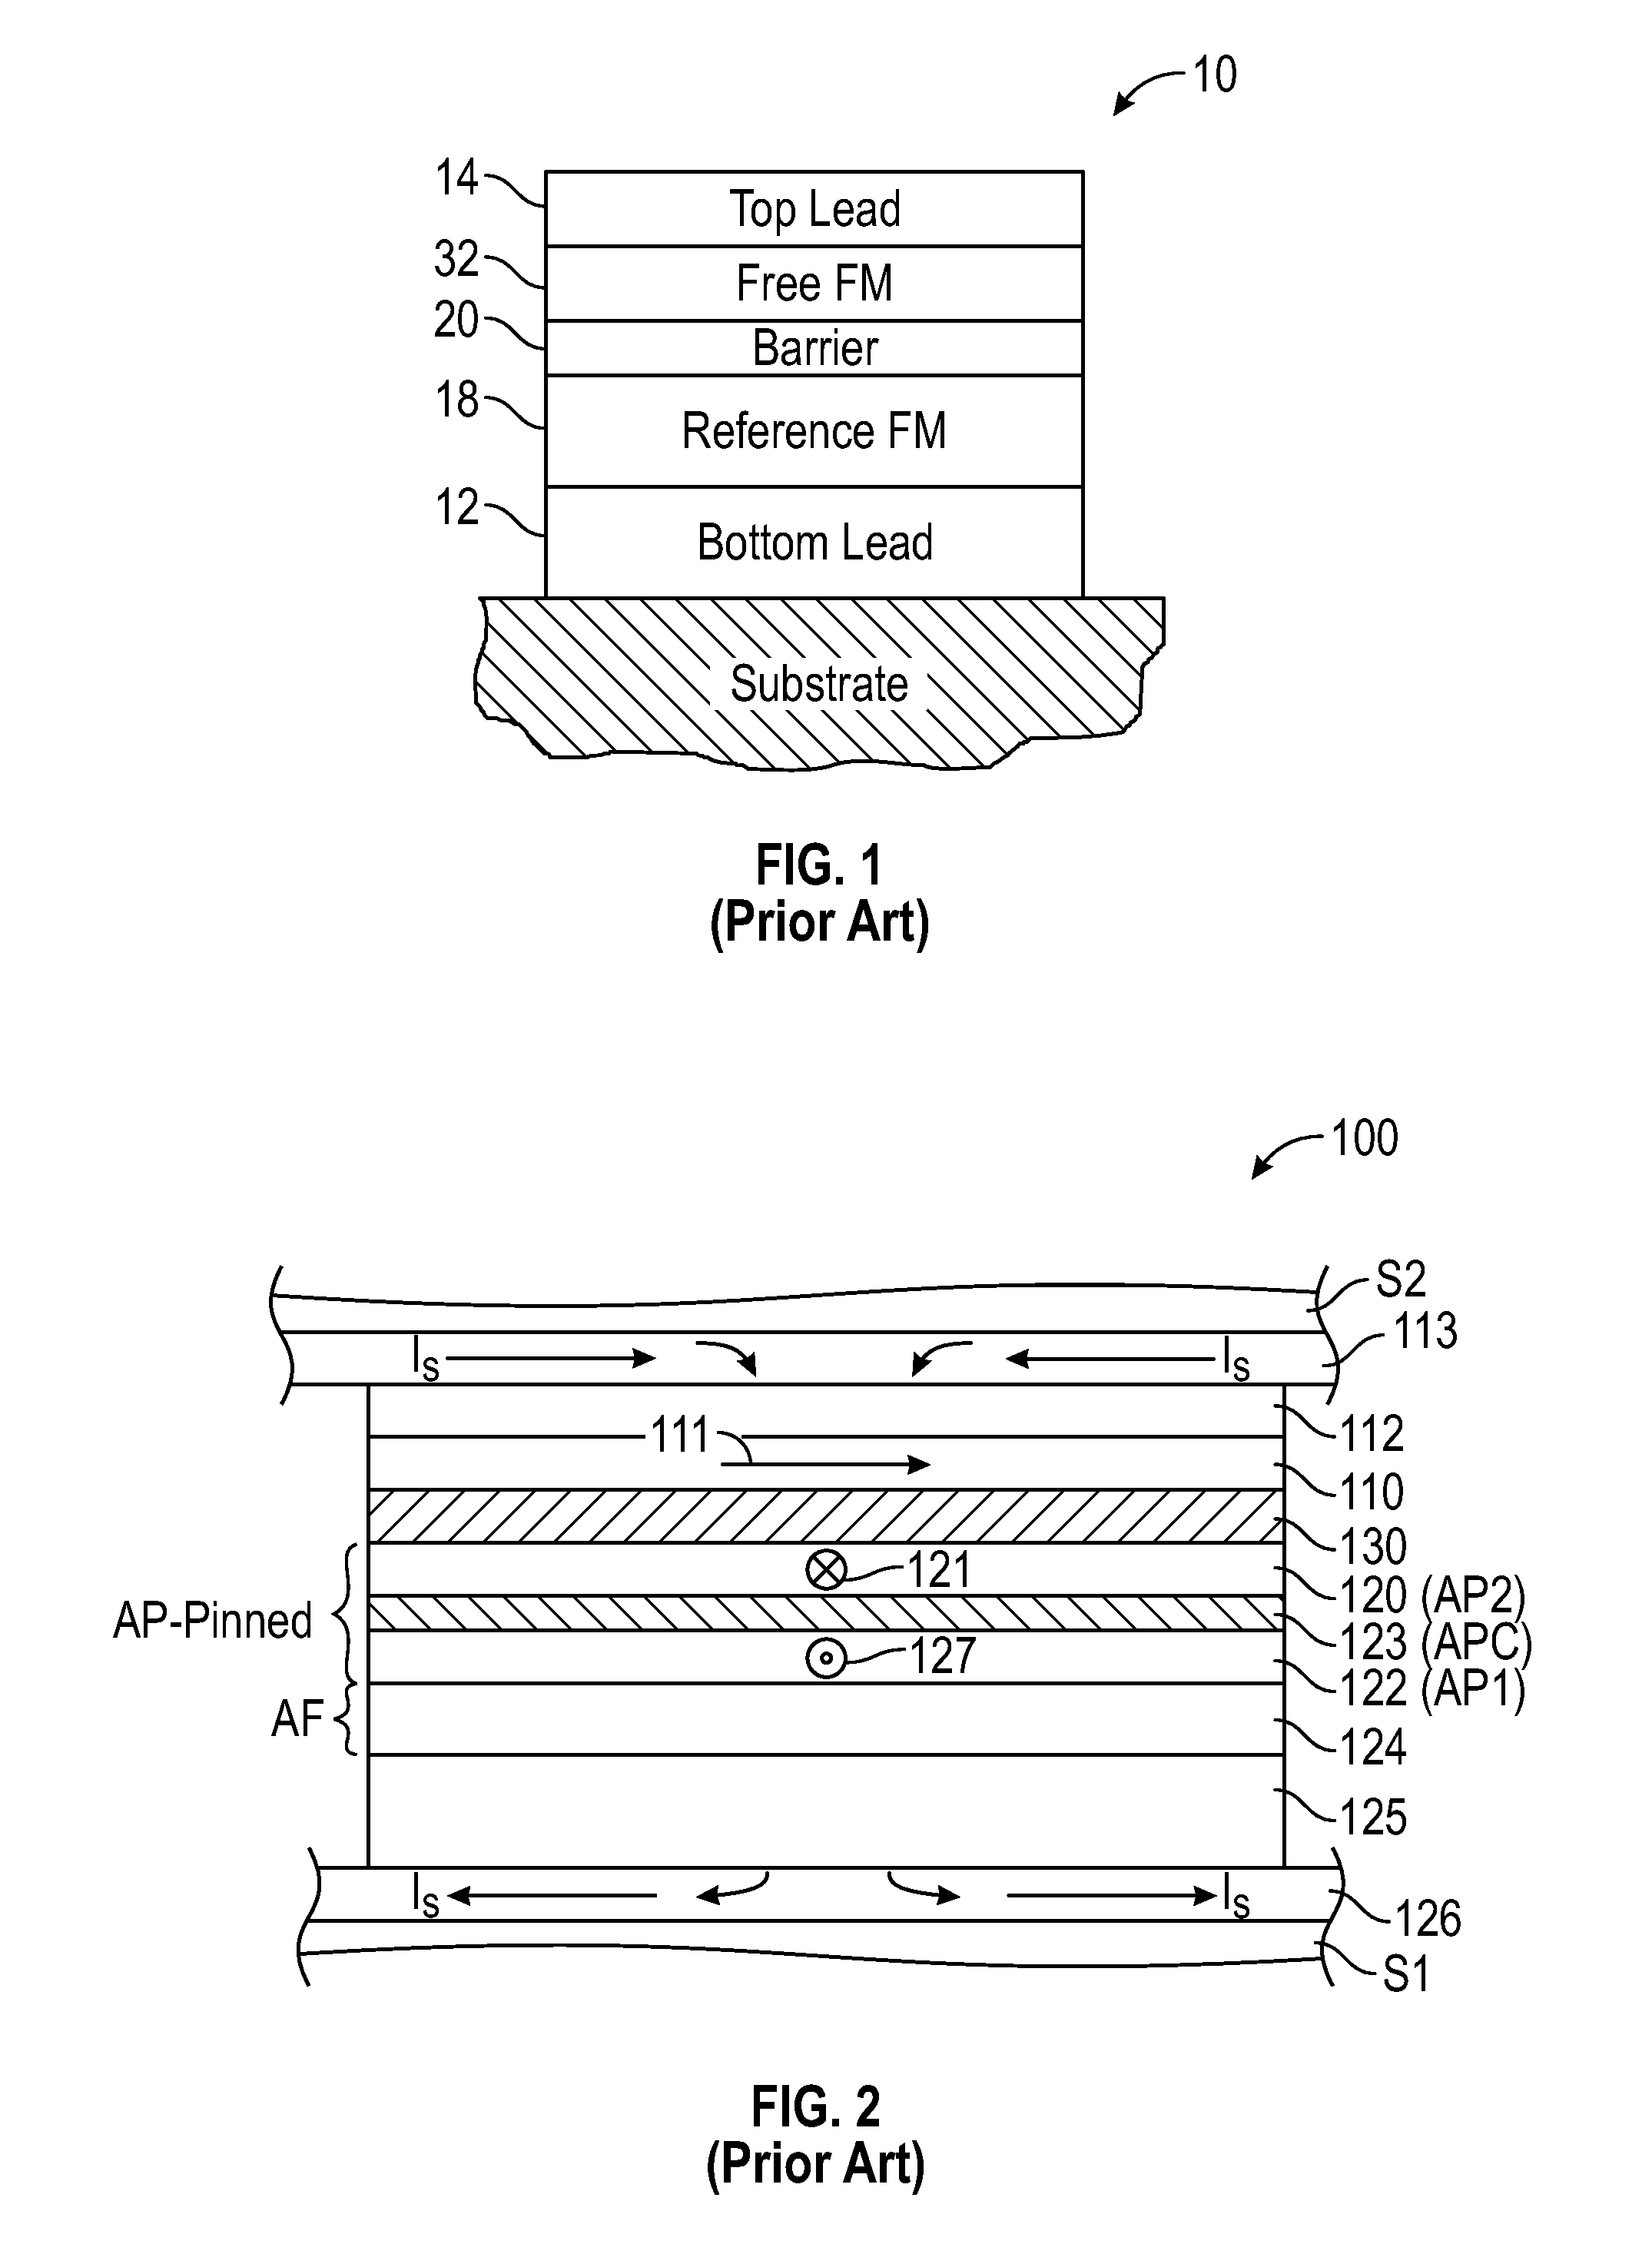 Tunneling magnetoresistive (TMR) device with magnesium oxide tunneling barrier layer and free layer having insertion layer